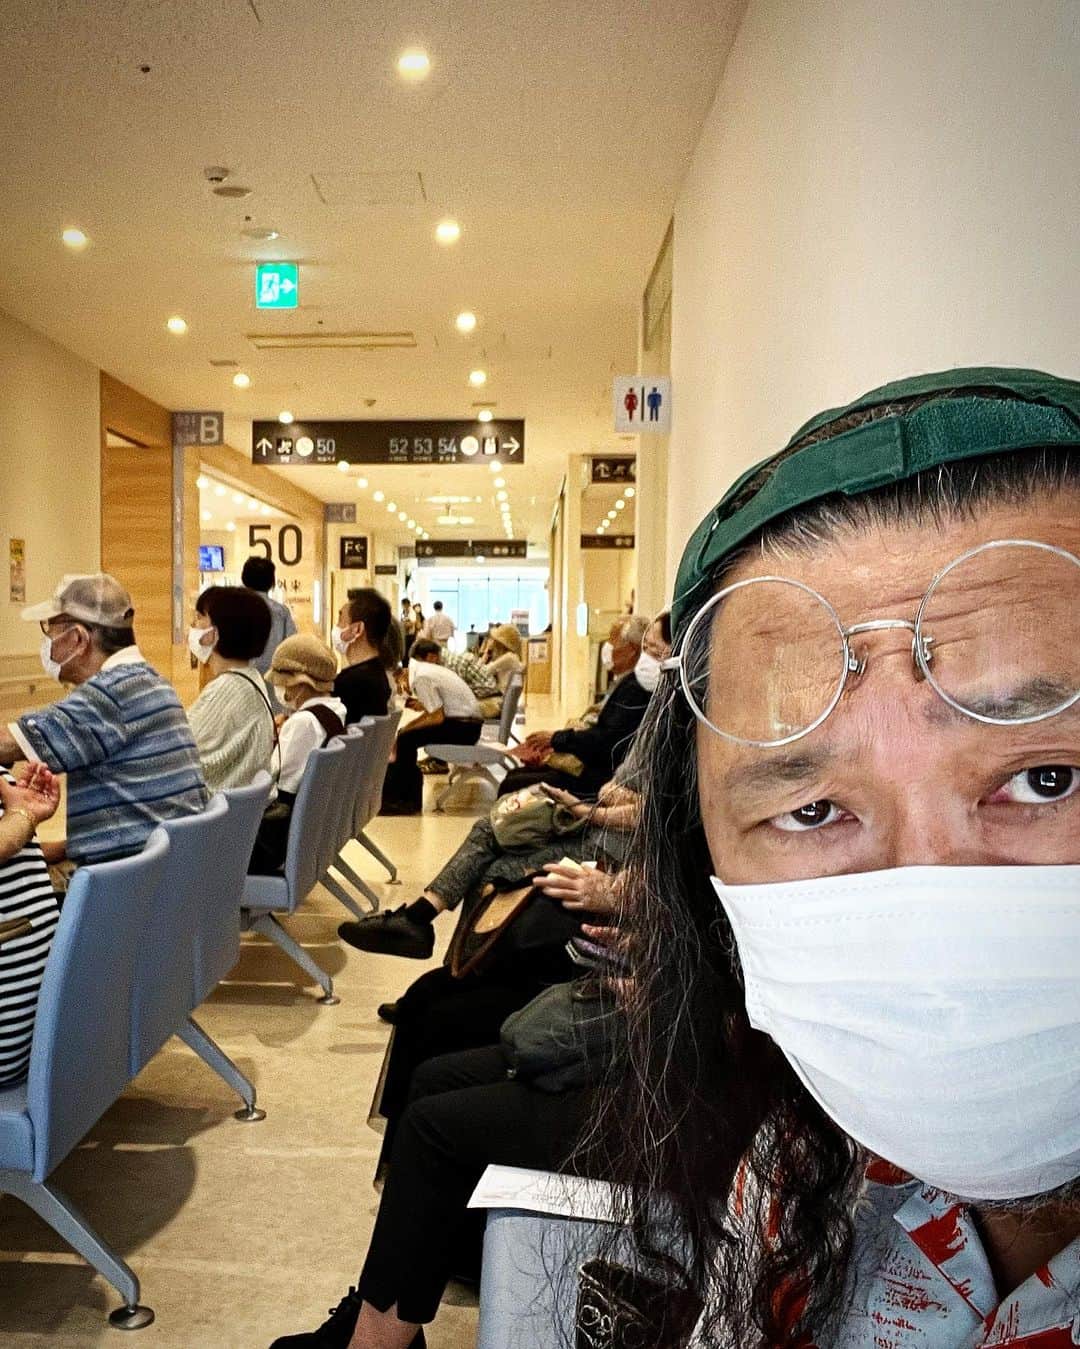 村上隆さんのインスタグラム写真 - (村上隆Instagram)「As those of you who are over 60 can relate, as we get older, we get crazy busy. The reason is that you now have to go to the hospital frequently. Each part of the machine that is your body is getting worn out and out of balance, so you start to feel discomfort all over the place as you live your days.  Yesterday I went for an examination because my eyes were blurry. In the end, there was nothing wrong, but my eyes are never in perfect condition either because I used to have dry eyes and, since when I was around 40, I have been using silicone plugs to cover the tear ducts where tears drain into my nose at both corners of my eyes. I was given eye drops to dilate my pupils to check for cataracts and glaucoma, and for about three hours, it made everything look so bright and white that I couldn't see anything.  Anyway, there’s always something the matter with me these days. How disappointing.  60歳を超えた方は共感してもらえると思いますが、歳をとると、めちゃくちゃ忙しくなります。 理由は病院に頻繁に行かねばならなくなるからです。 身体という機械の各パーツがヨレヨレになって来て、そのバランスがおかしくなってきているので、生きててアチコチに違和感が出てくるのです。  昨日は目が霞むので検査をしに行きました。結論的には何も無かったのですが、元々ドライアイで、40歳頃より目頭と目尻の涙が鼻に抜ける穴にシリコンで蓋をして、目に涙を溜めてたりするので、完全な調子ではないのです。 で、白内障、緑内障を検査するために瞳孔を開く目薬をさされてしまって、3時間くらい、何もかも白飛びして眩しすぎて、見えなくなったりして、大変な半日でした。  兎に角、あれこれ具合が悪い日々ではあります。 とほほ。」7月8日 8時51分 - takashipom